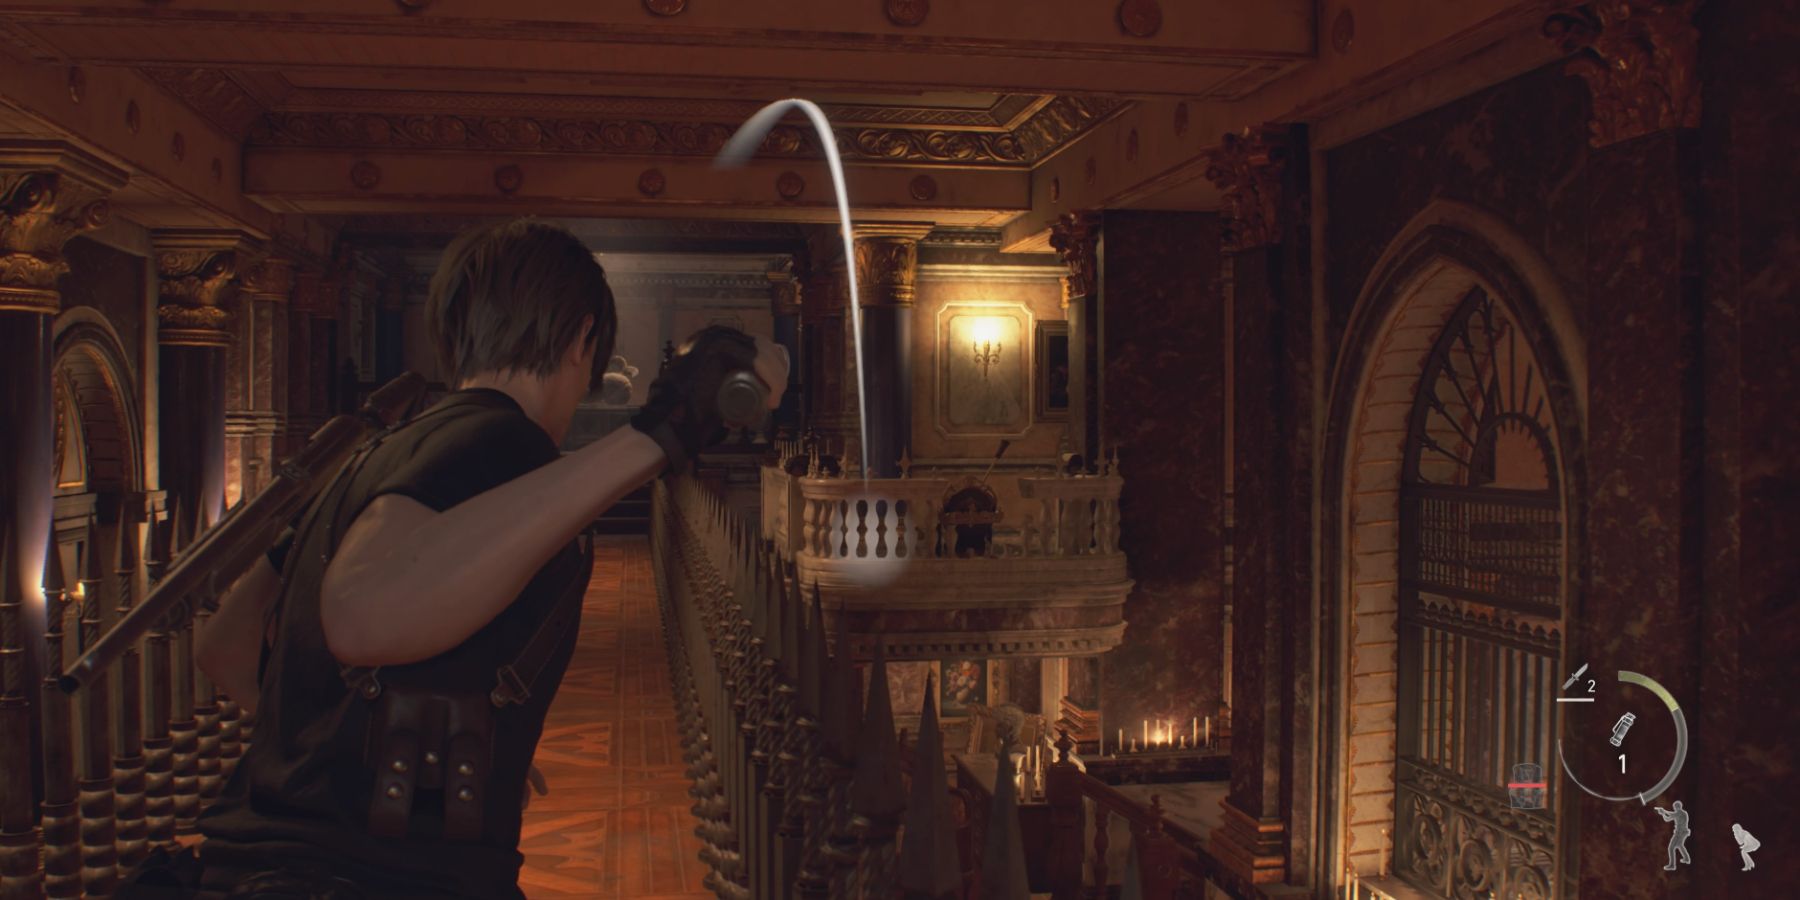 Leon throws a Flash Grenade in Resident Evil 4 remake